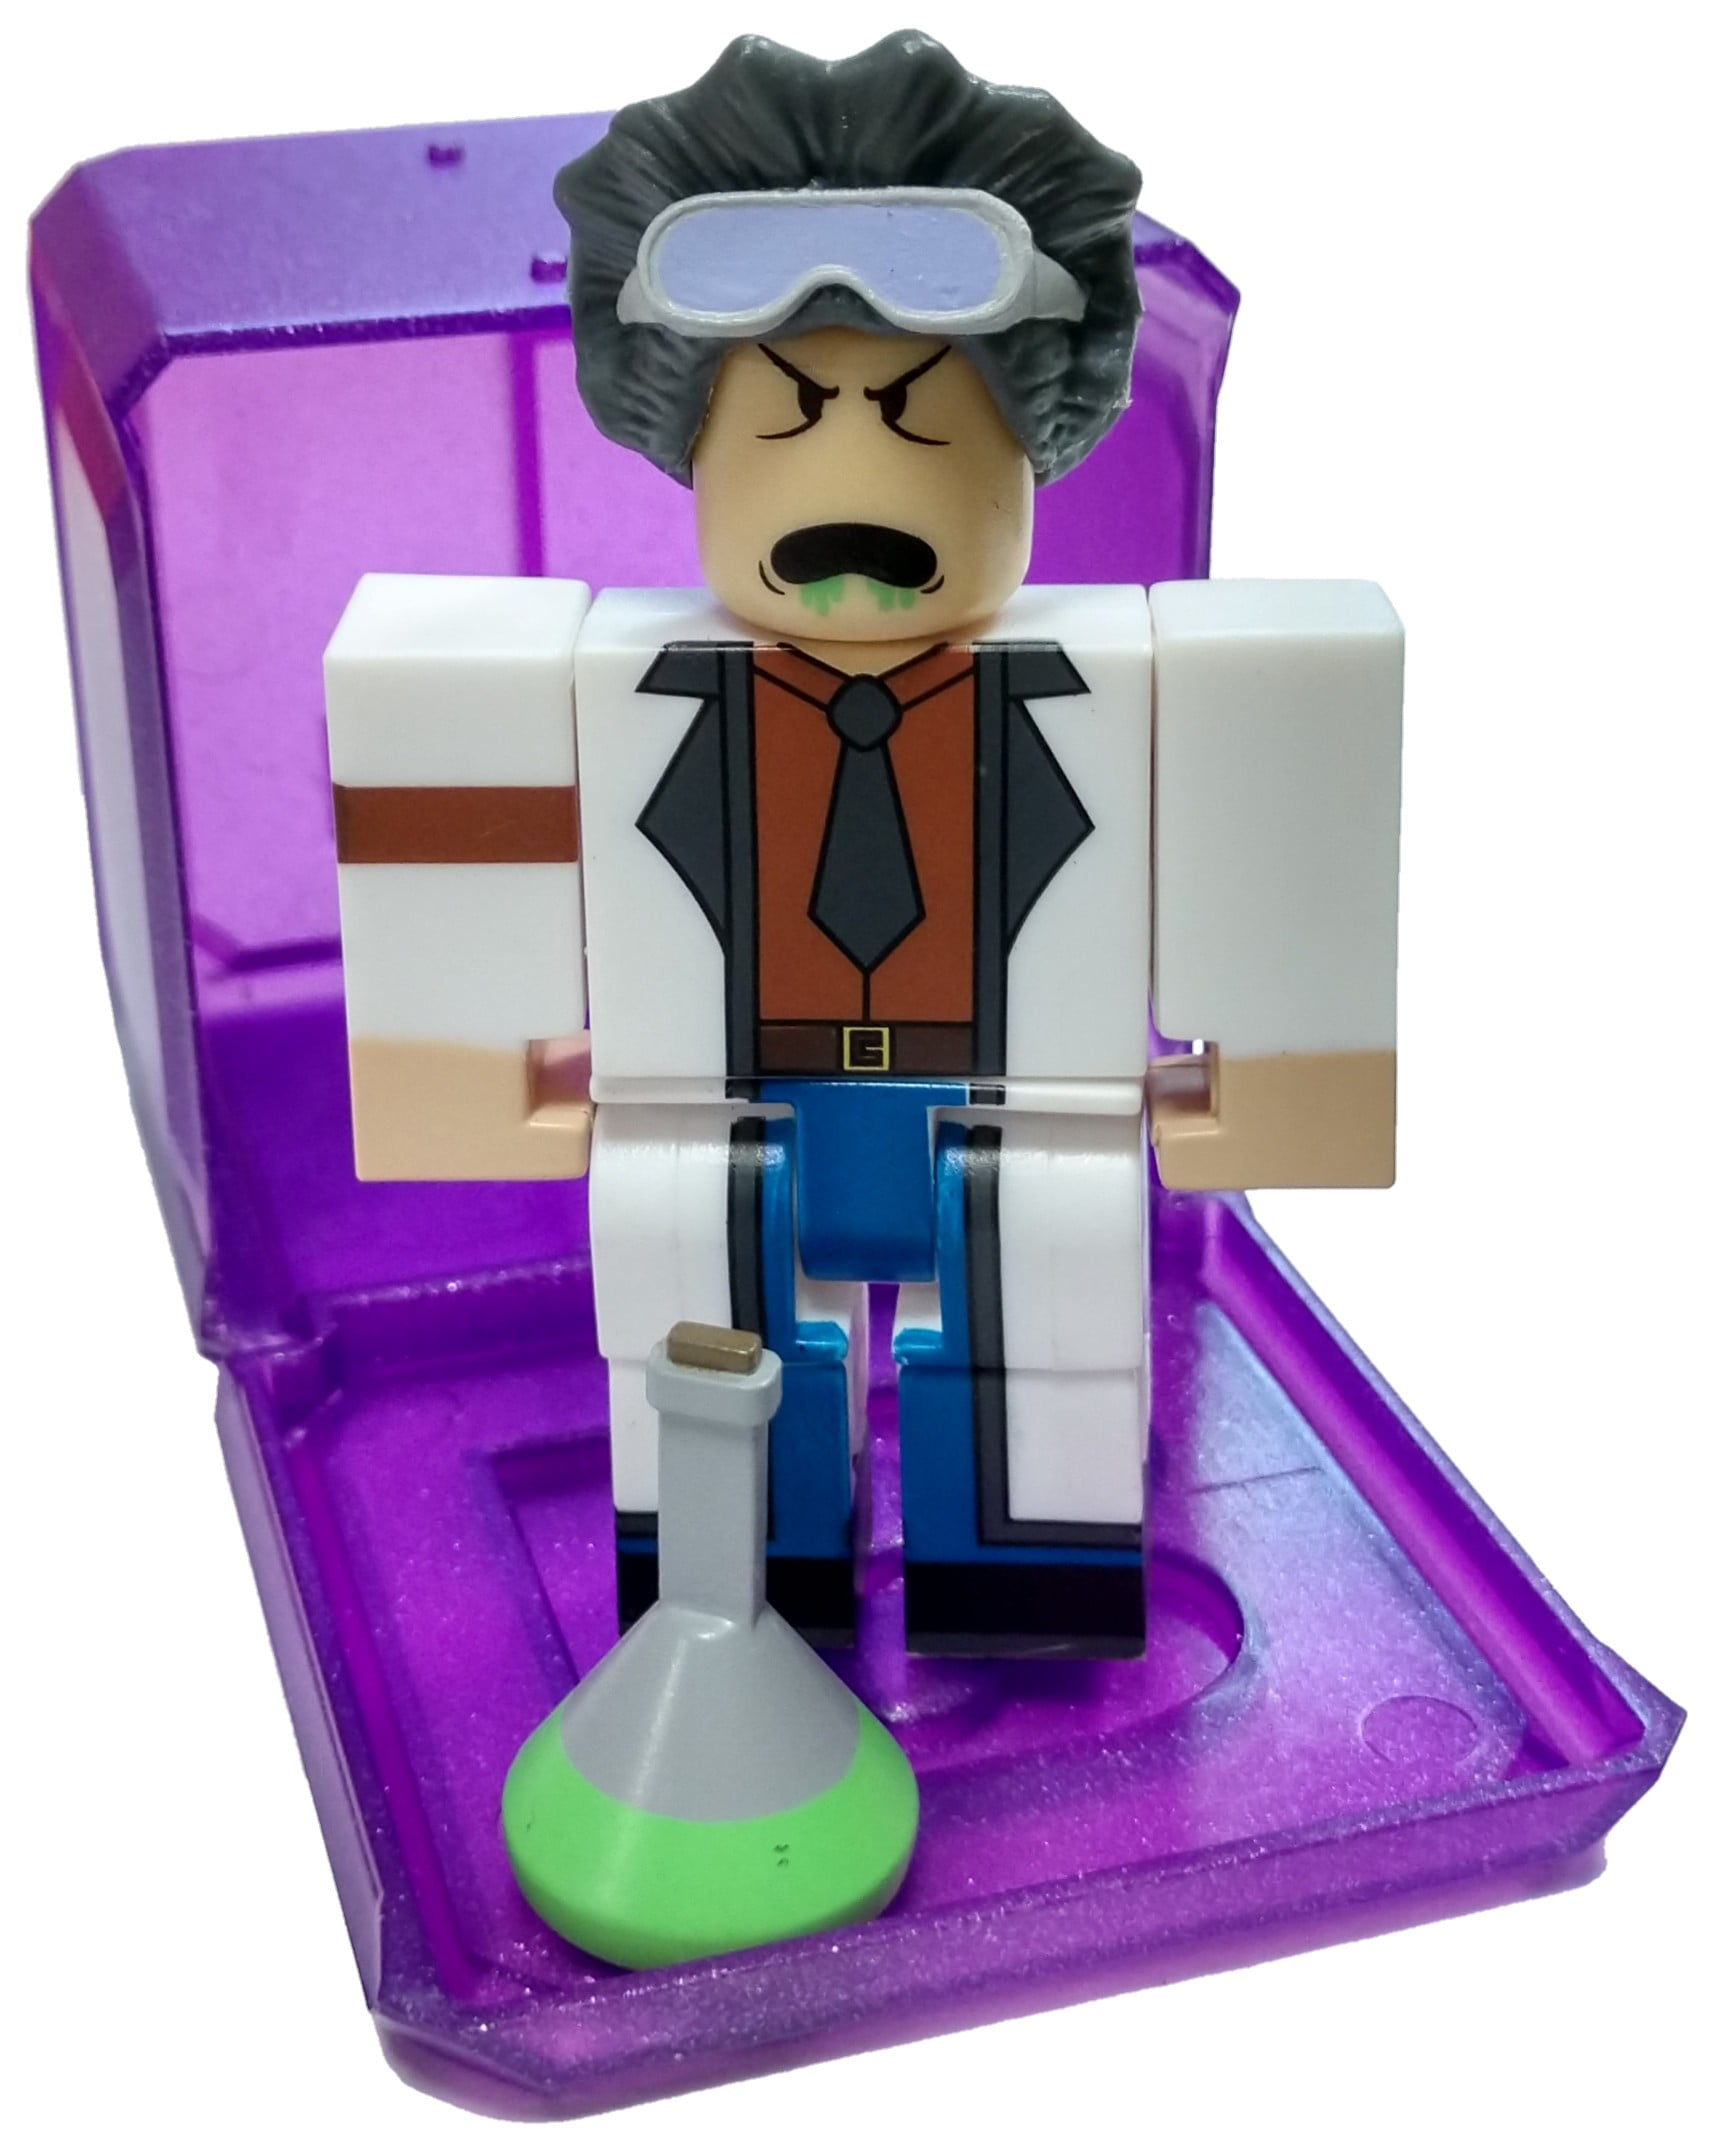 Roblox Celebrity Collection Series 3 Innovation Industries Scientist Zombie Mini Figure With Cube And Online Code No Packaging Walmart Com Walmart Com - roblox zombie online